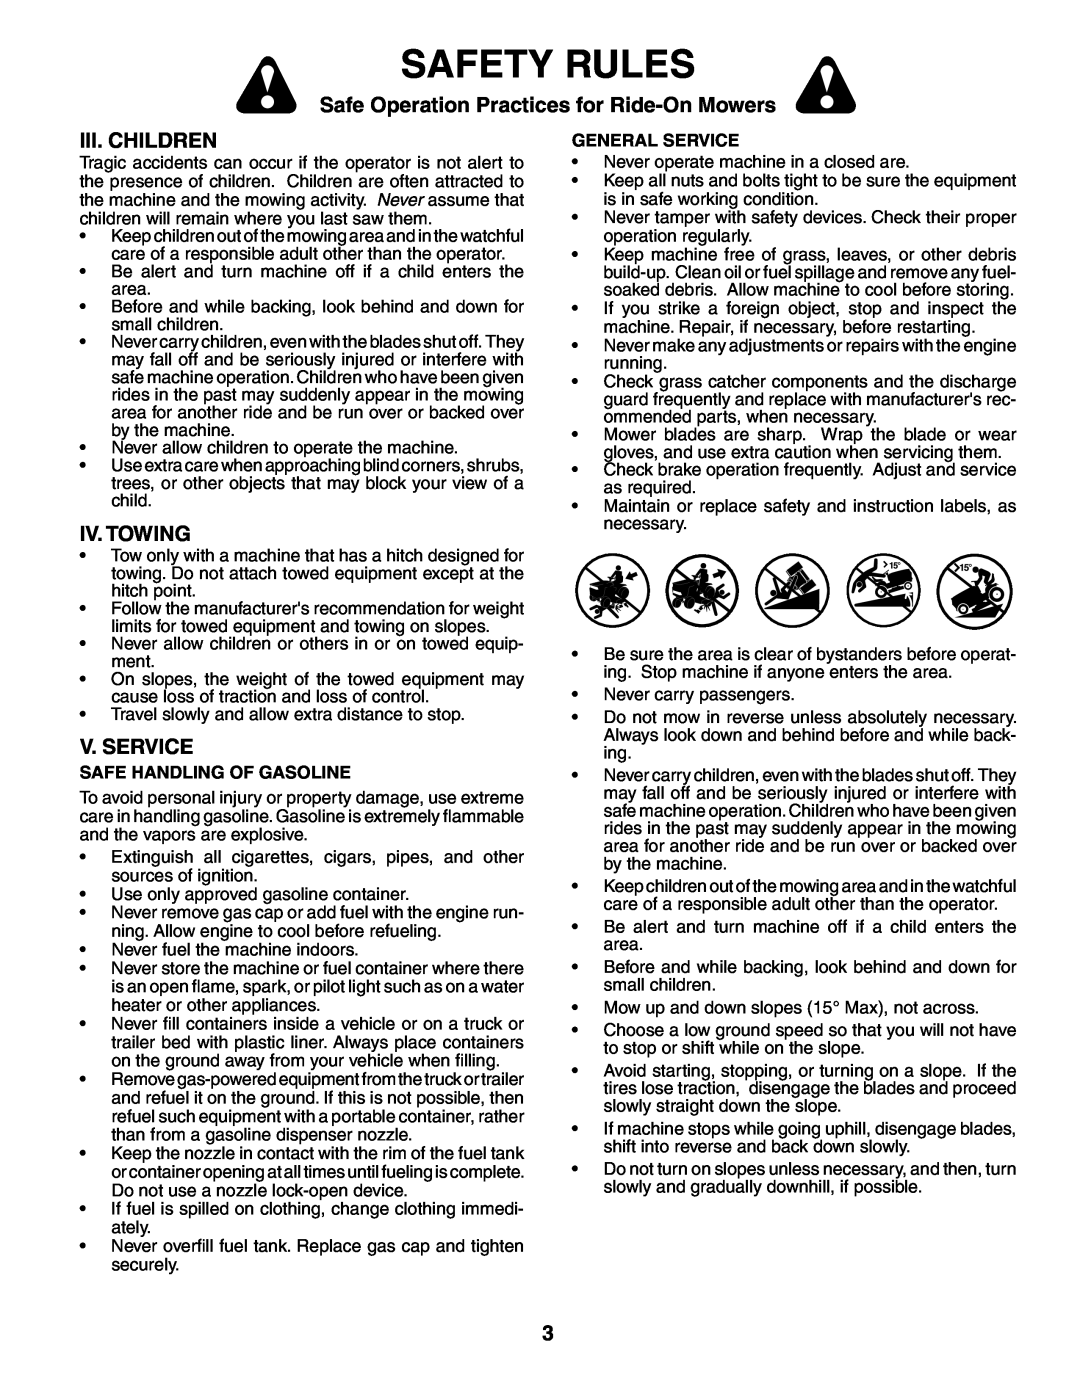 Ryobi 197788 manual Iii. Children, Iv. Towing, V. Service, Safety Rules, Safe Operation Practices for Ride-On Mowers 